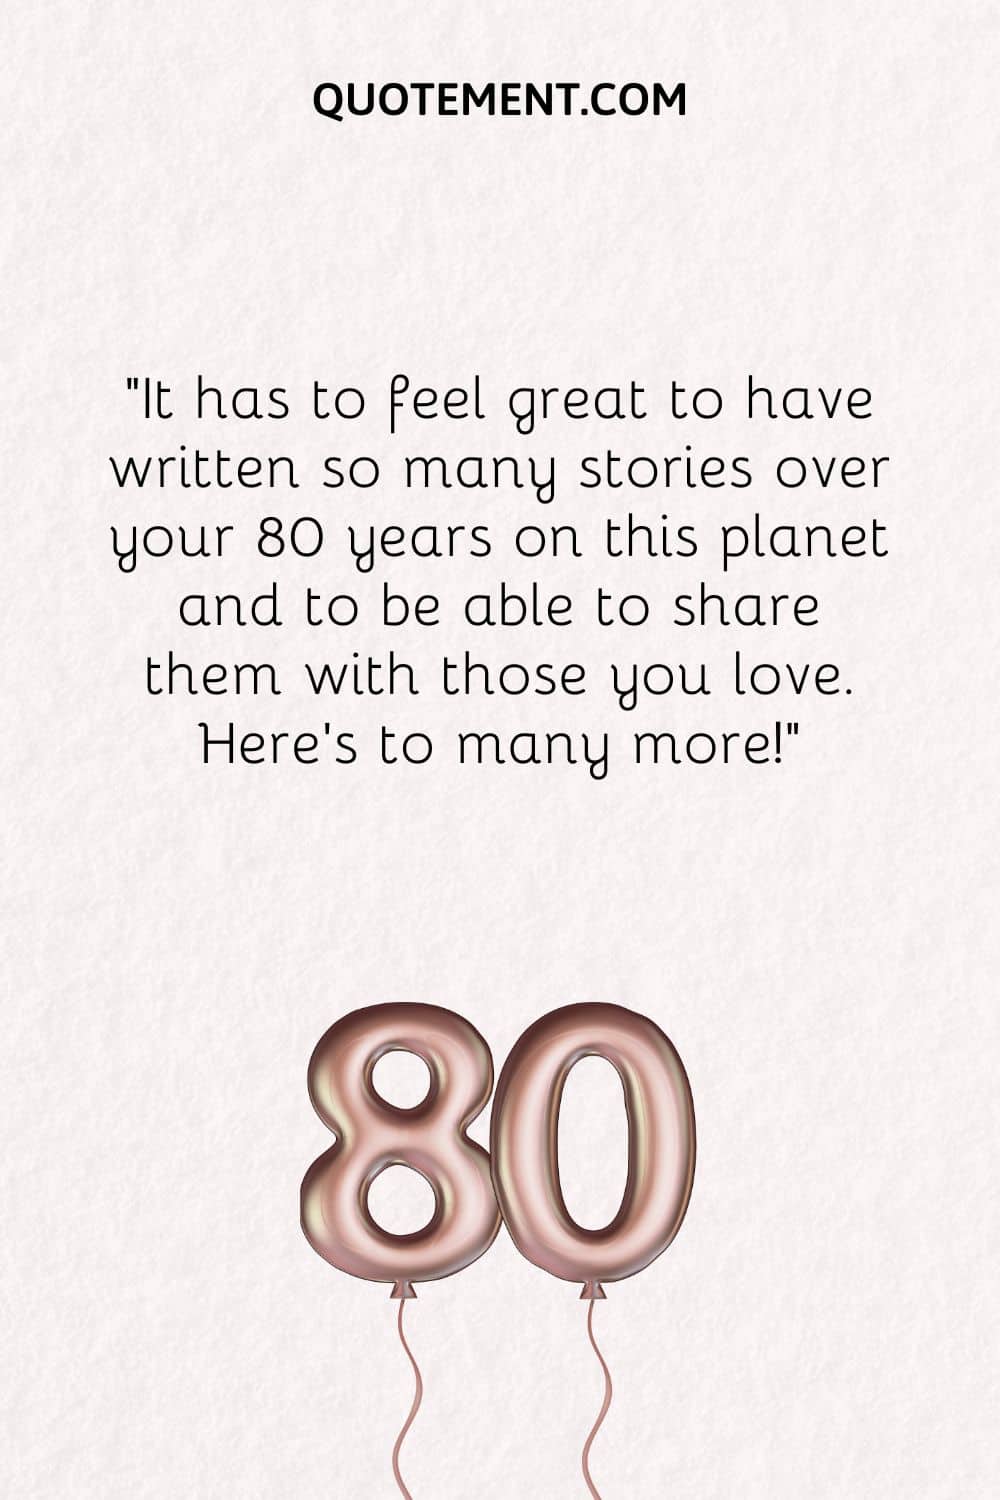 It has to feel great to have written so many stories over your 80 years on this planet 